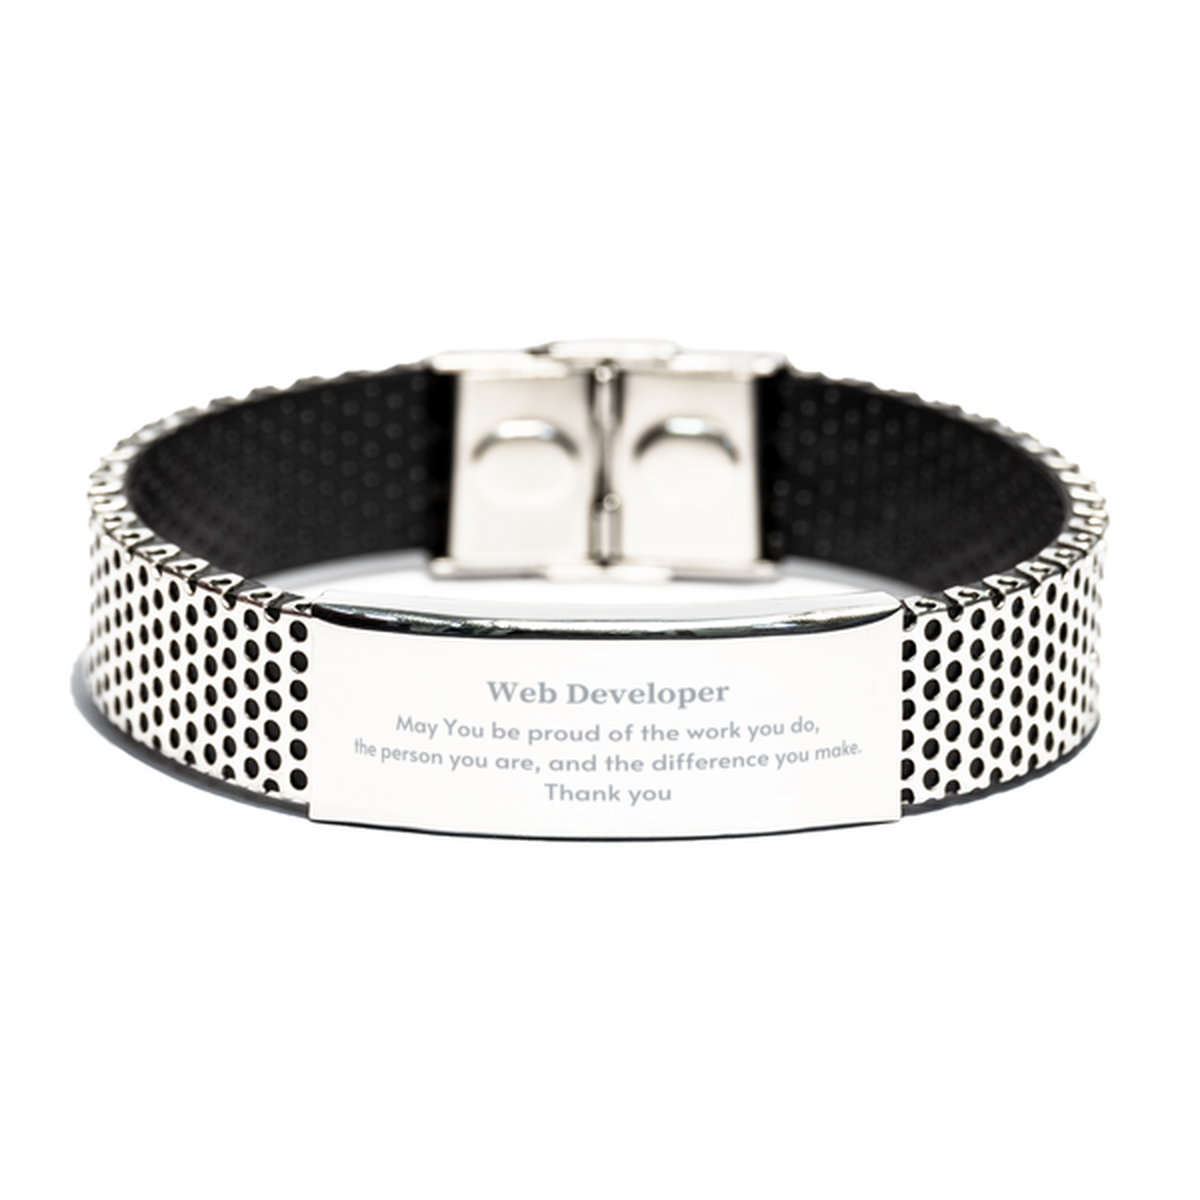 Heartwarming Stainless Steel Bracelet Retirement Coworkers Gifts for Web Developer, Web Developer May You be proud of the work you do, the person you are Gifts for Boss Men Women Friends